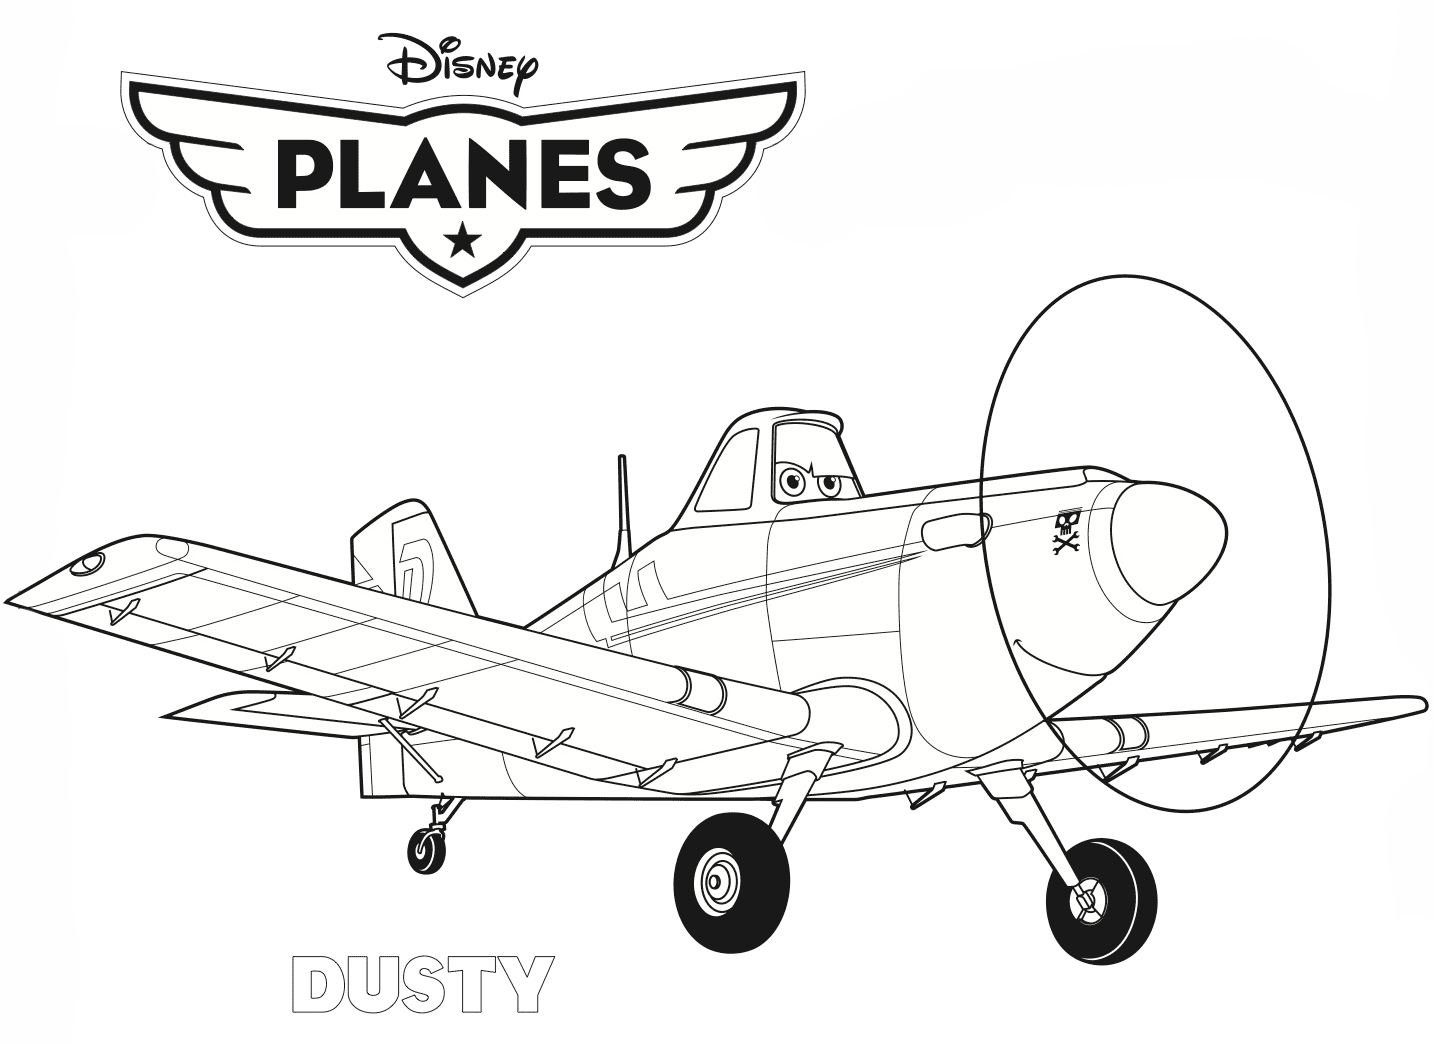 Disney Planes Coloring Pages 7